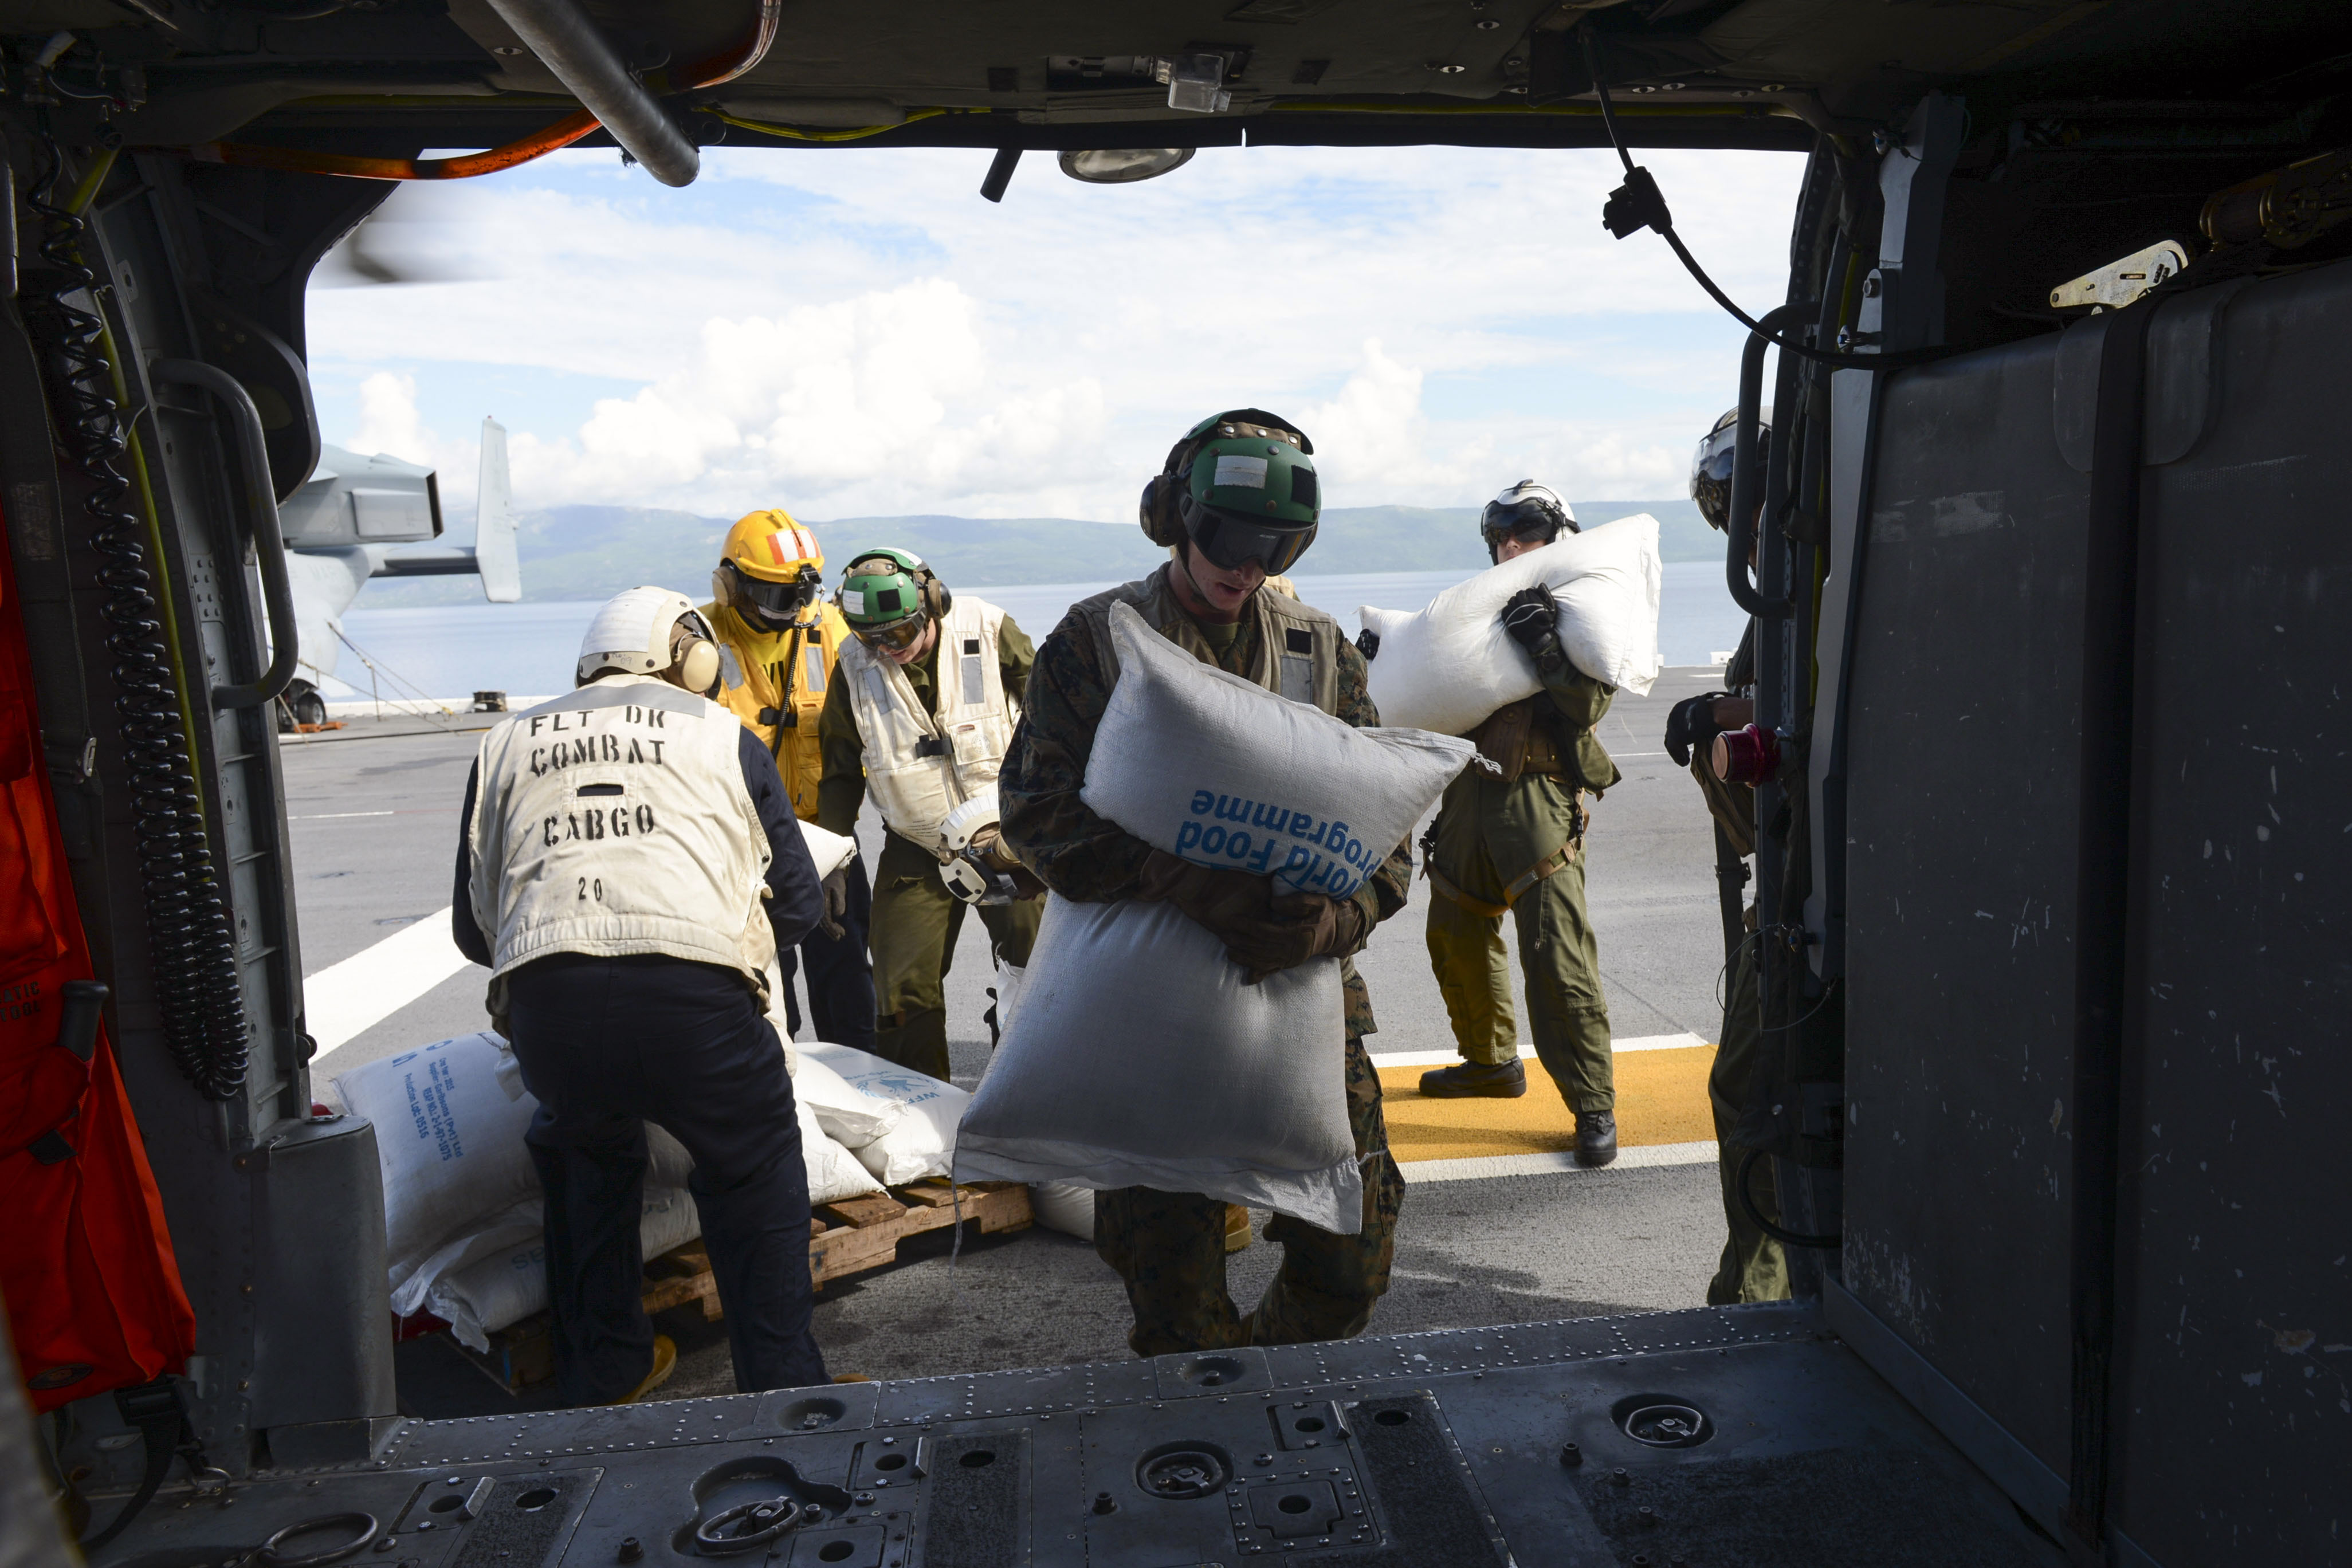 Sailors and Marines attached to Joint Task Force (JTF) Matthew load food for delivery onto an MH-60S Knighthawk, assigned to Helicopter Sea Combat Squadron 28 (HSC-28), aboard amphibious assault ship USS Iwo Jima (LHD 7) on Oct. 18. US Navy photo.